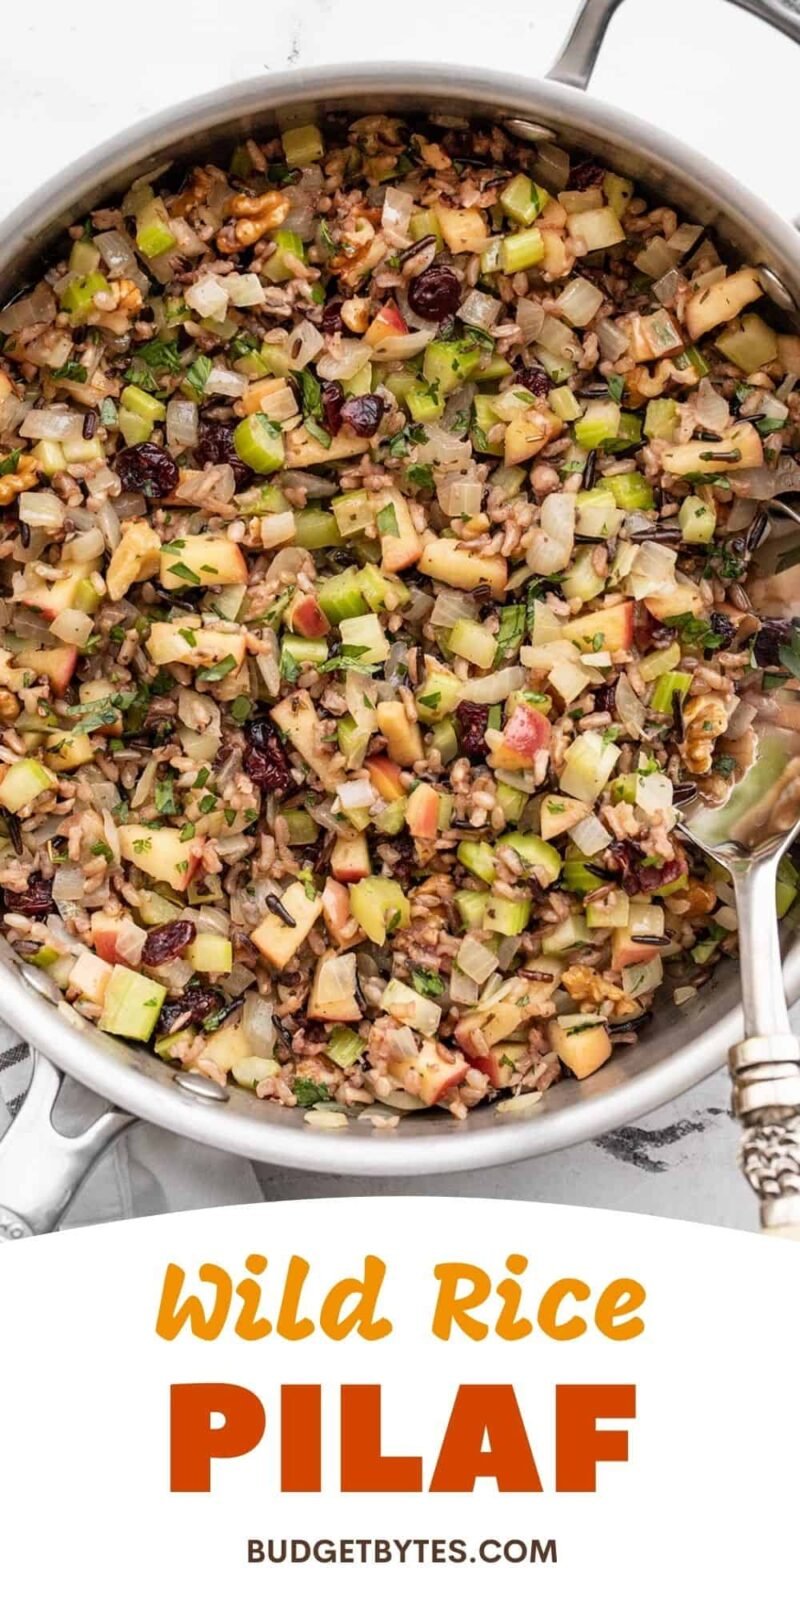 skillet full of wild rice pilaf, title text at the bottom